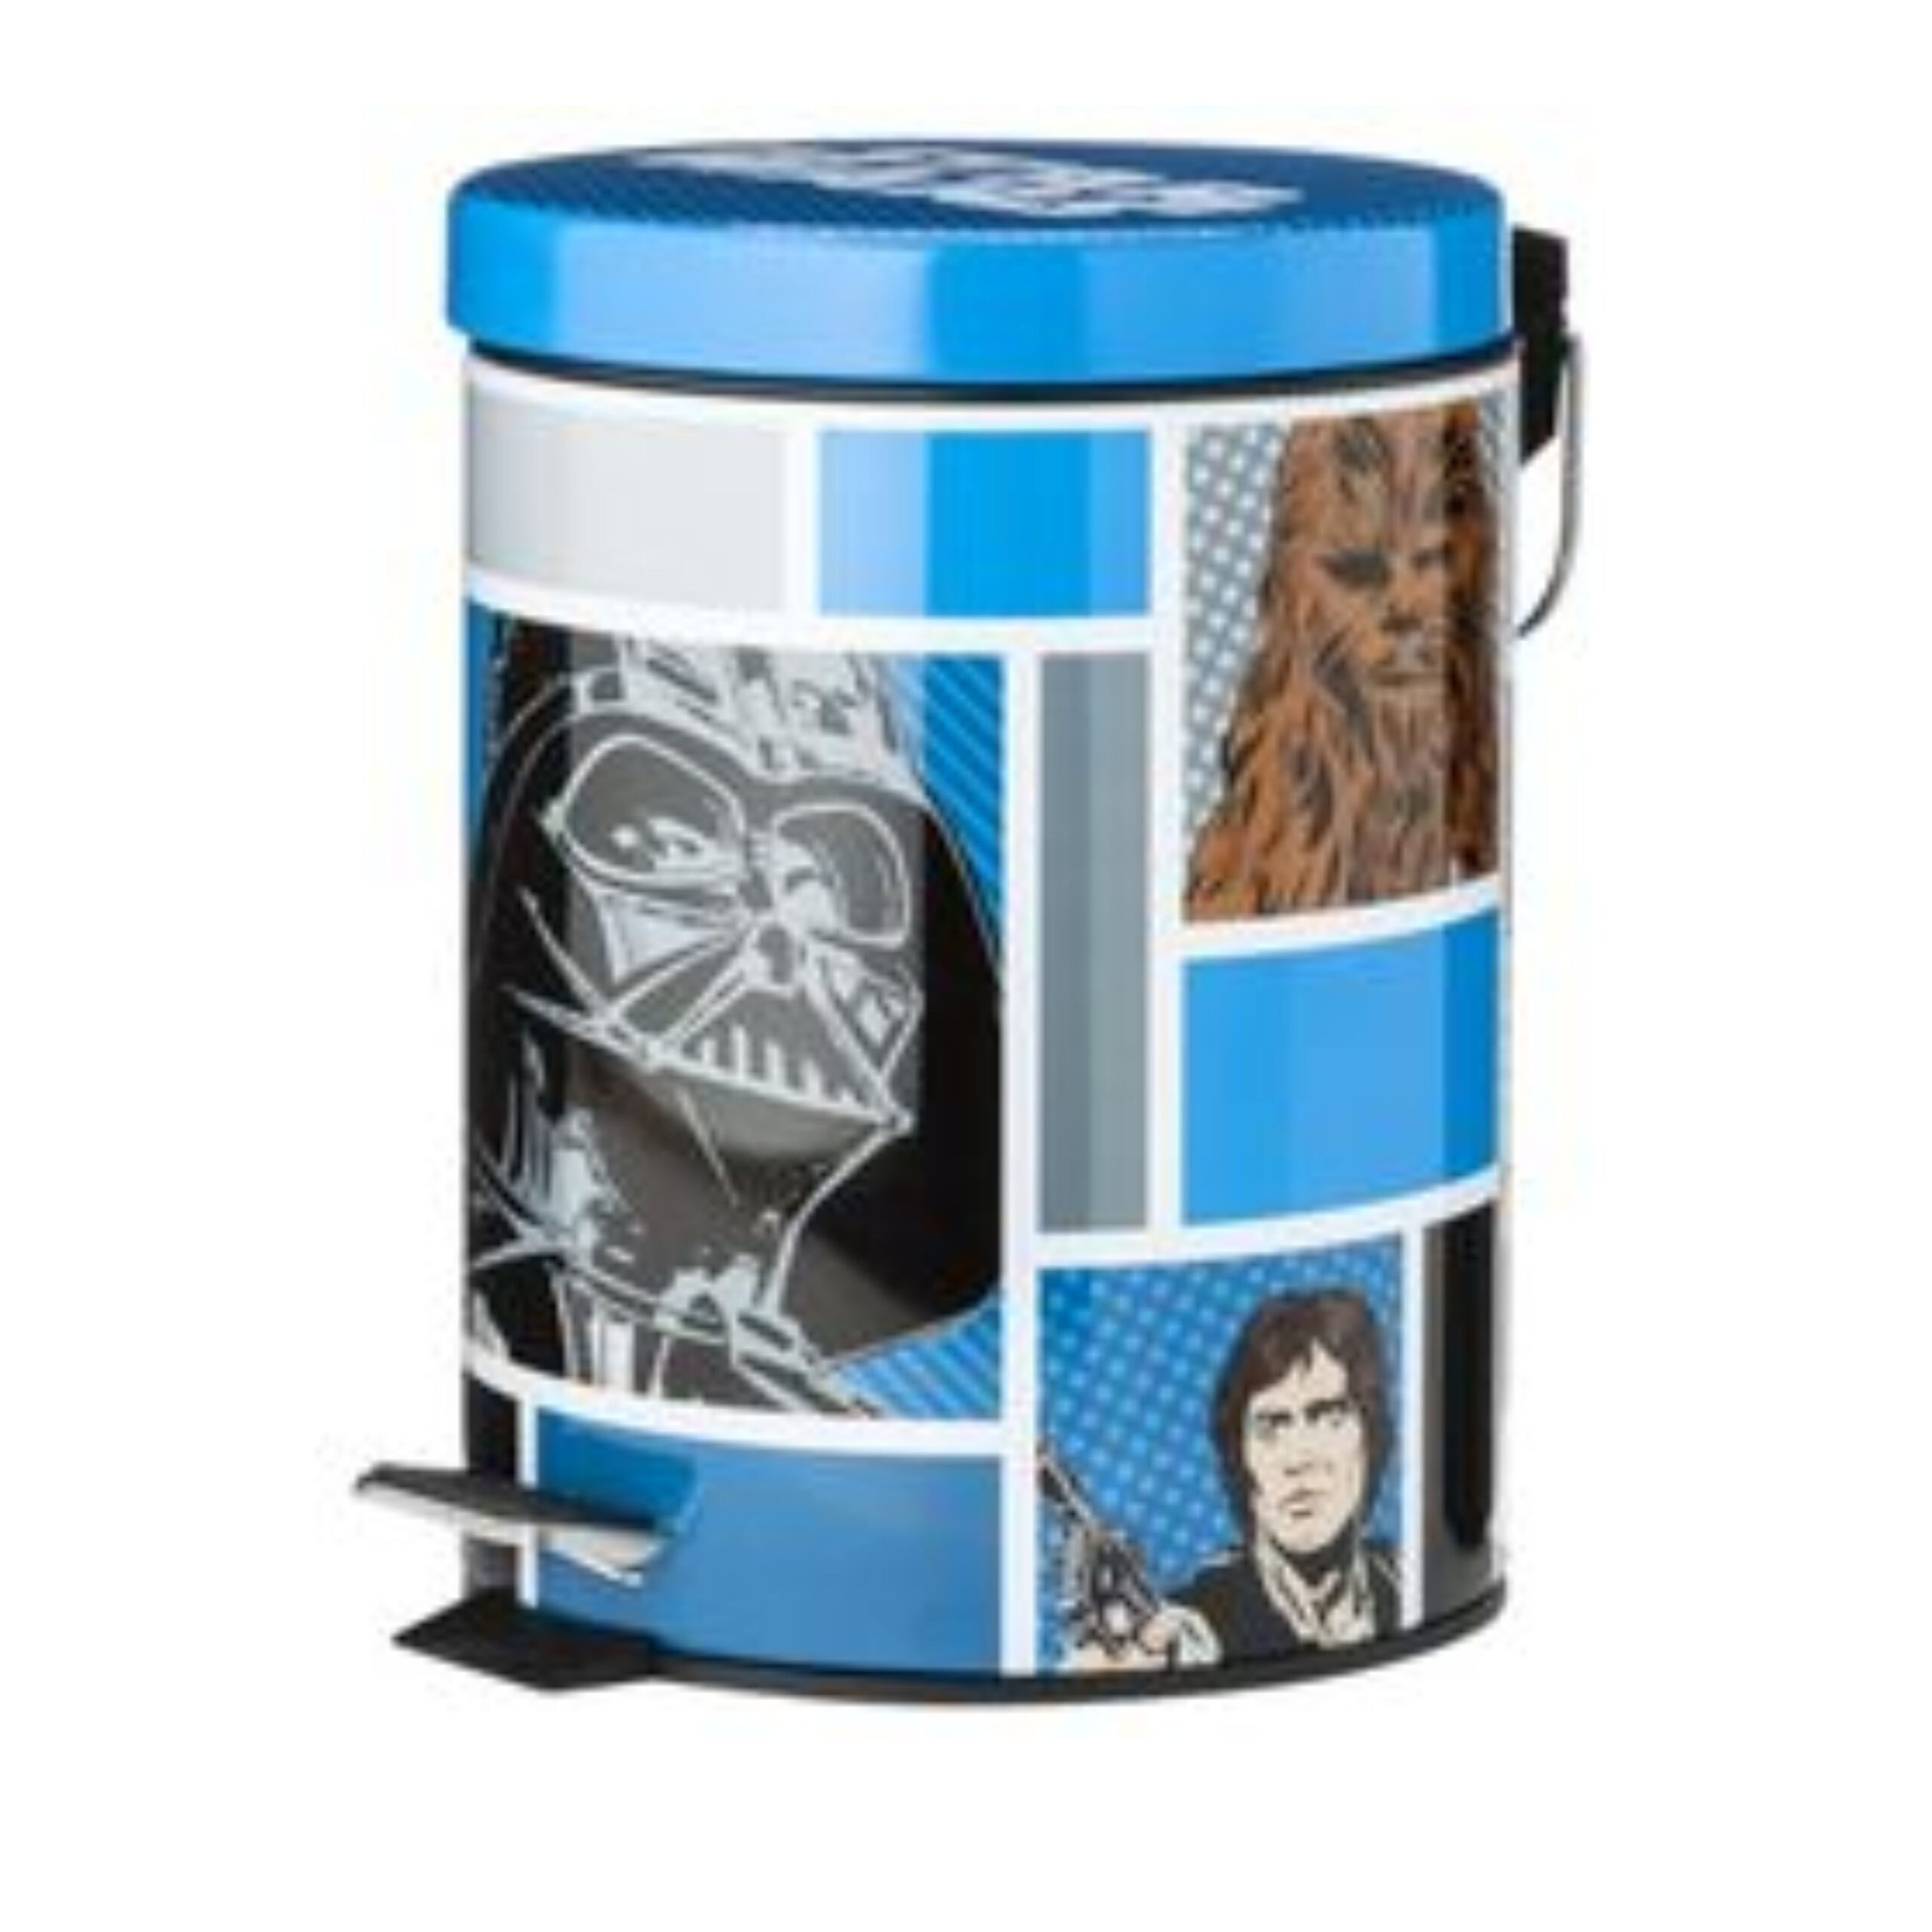 Star wars containers